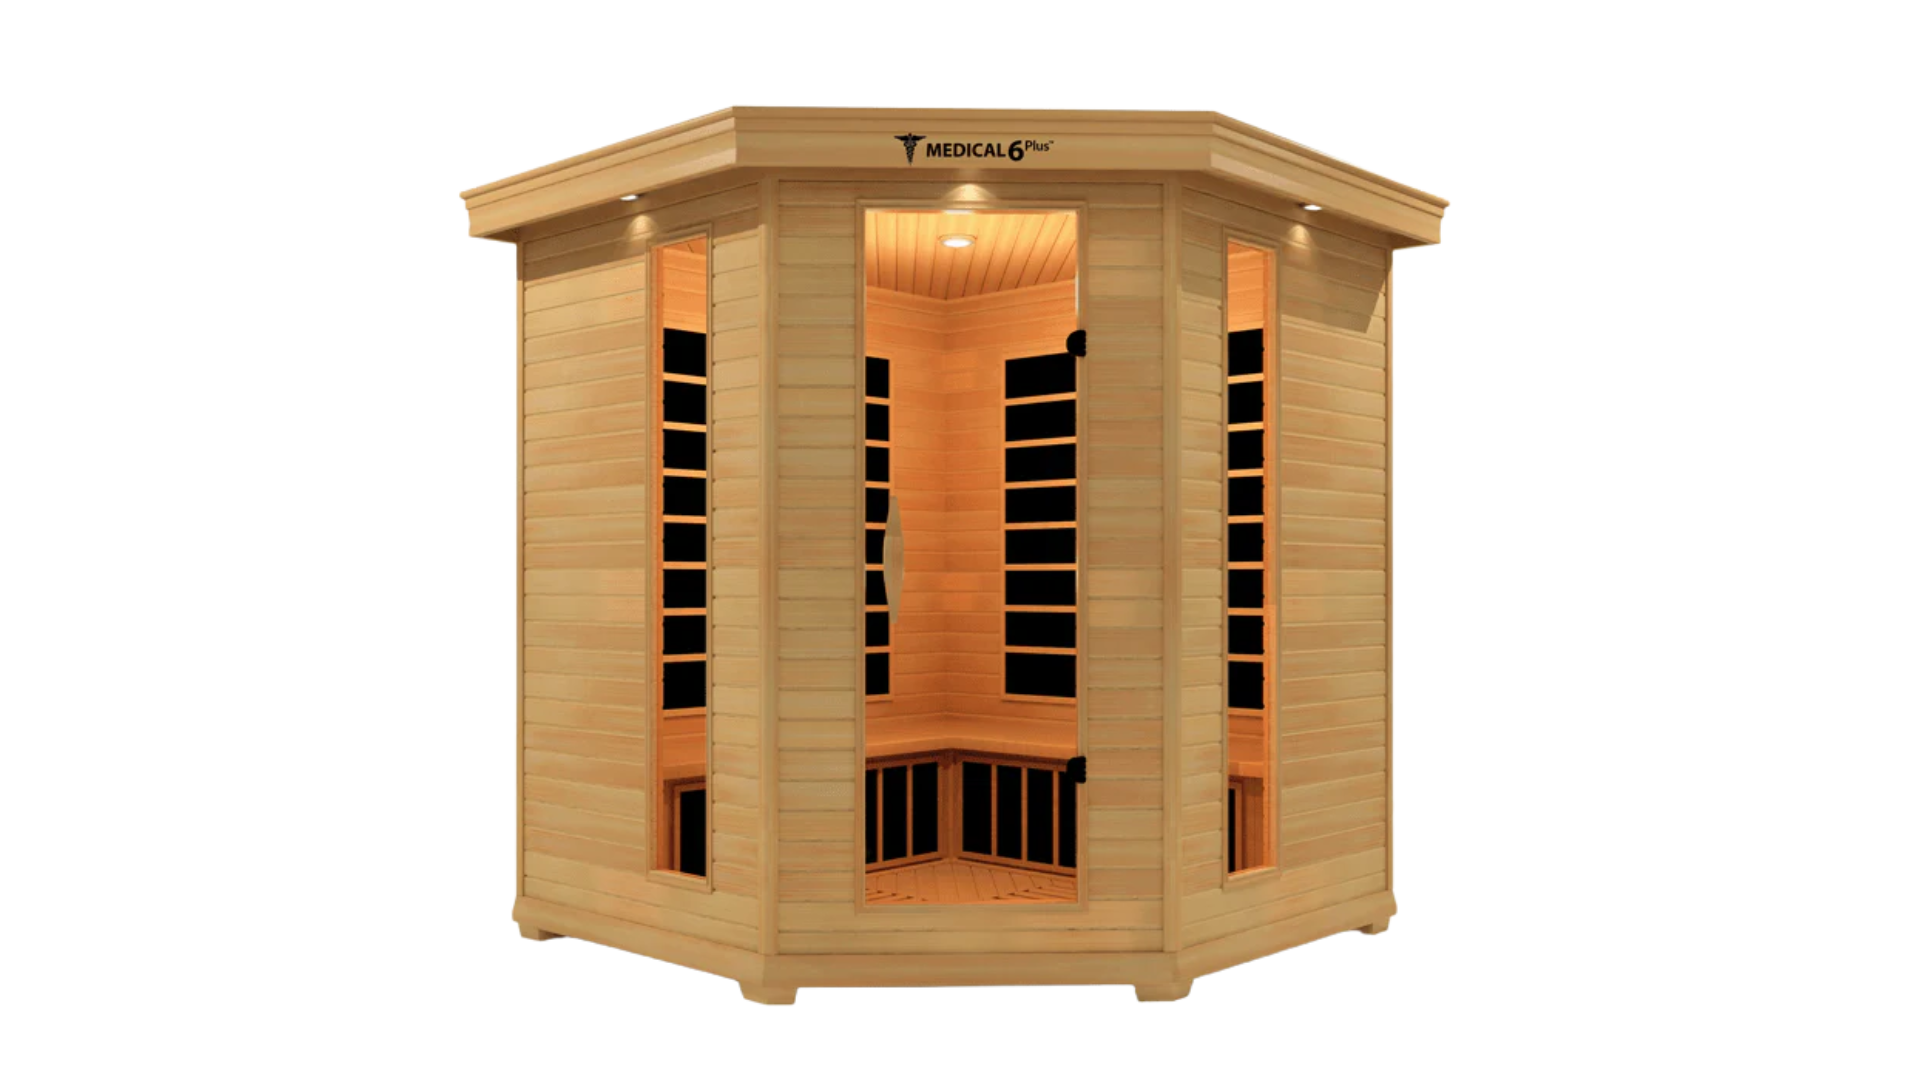 Image of the Medical 6 Plus - Medical Sauna, better than any portable sauna.